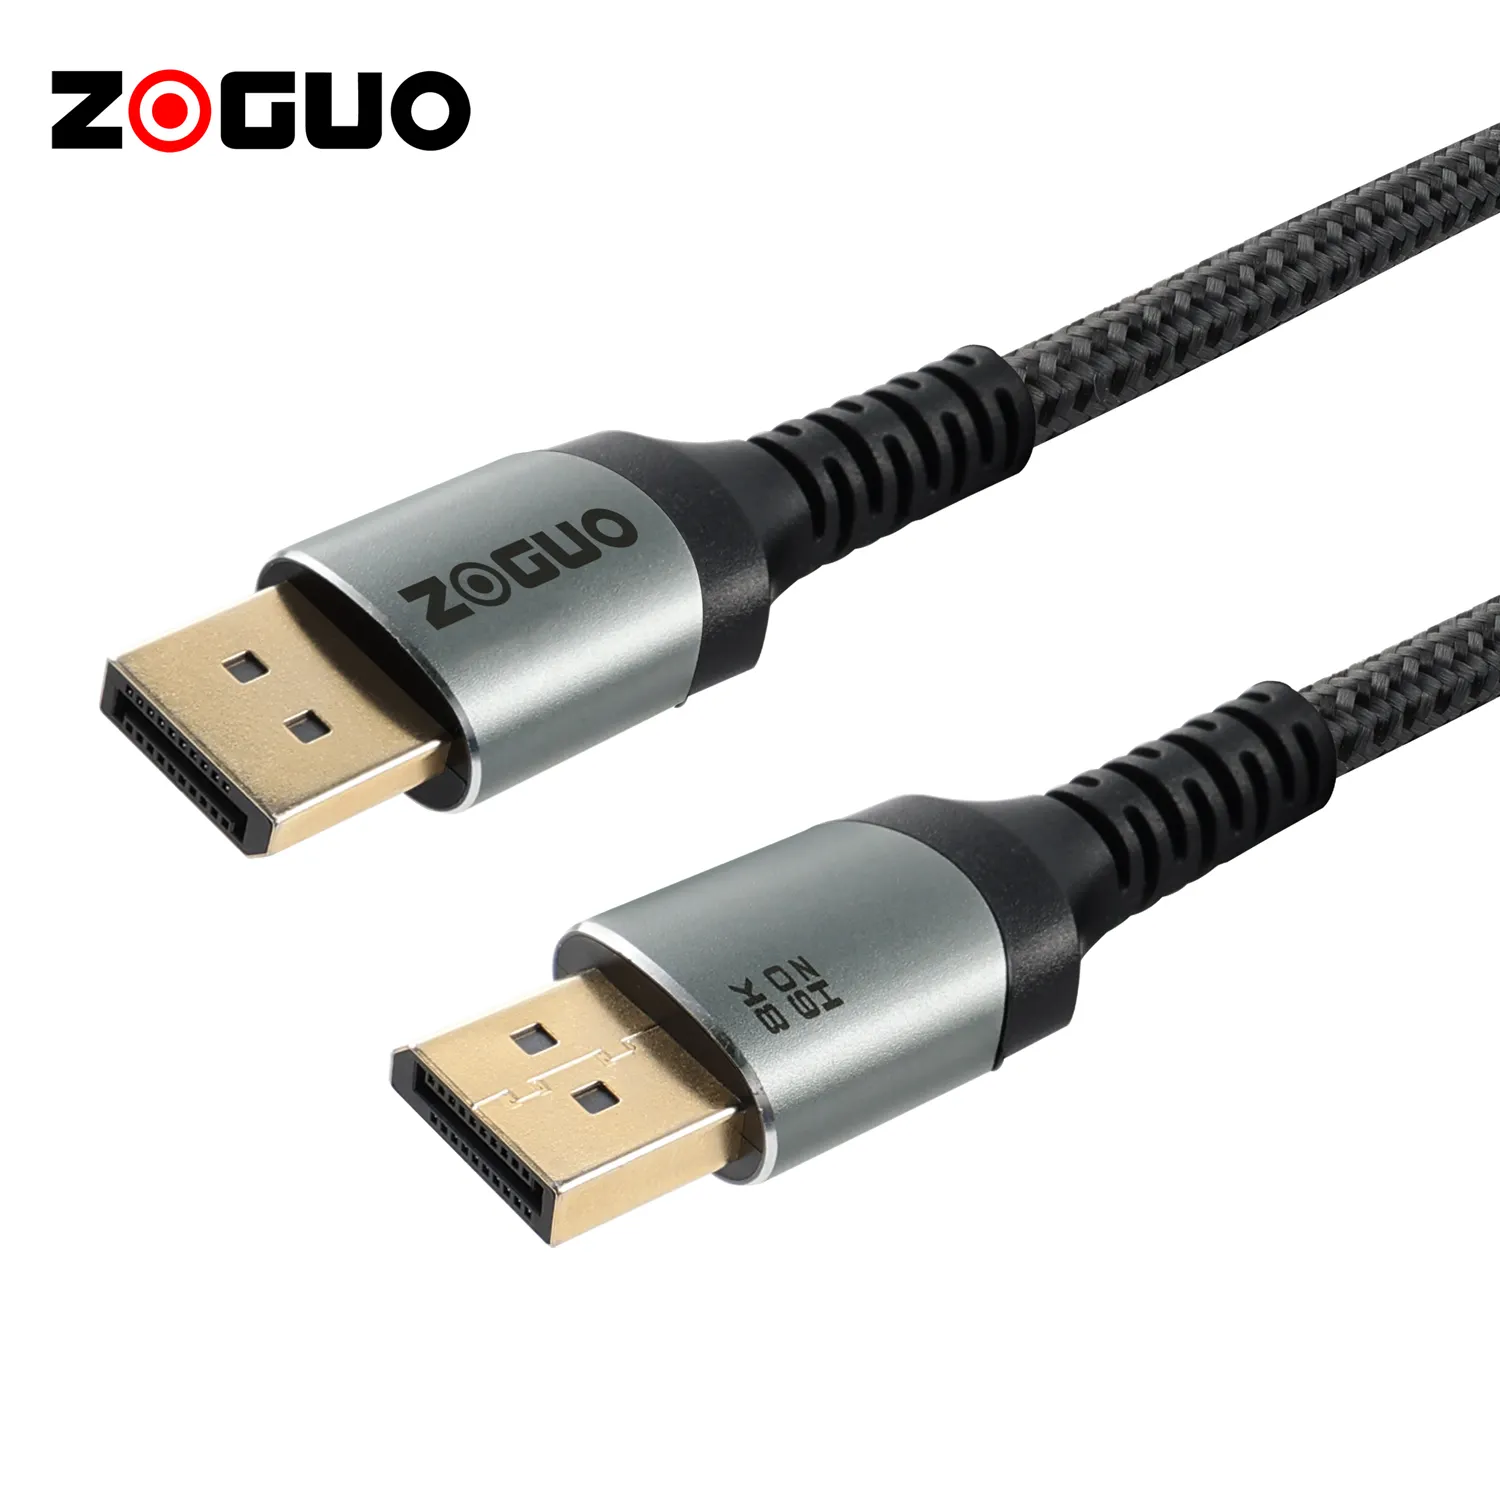 High Definition 8K Display Port Cable Gold Plated Silver Cables Custom DP 1.4 Plug HD Support HDR